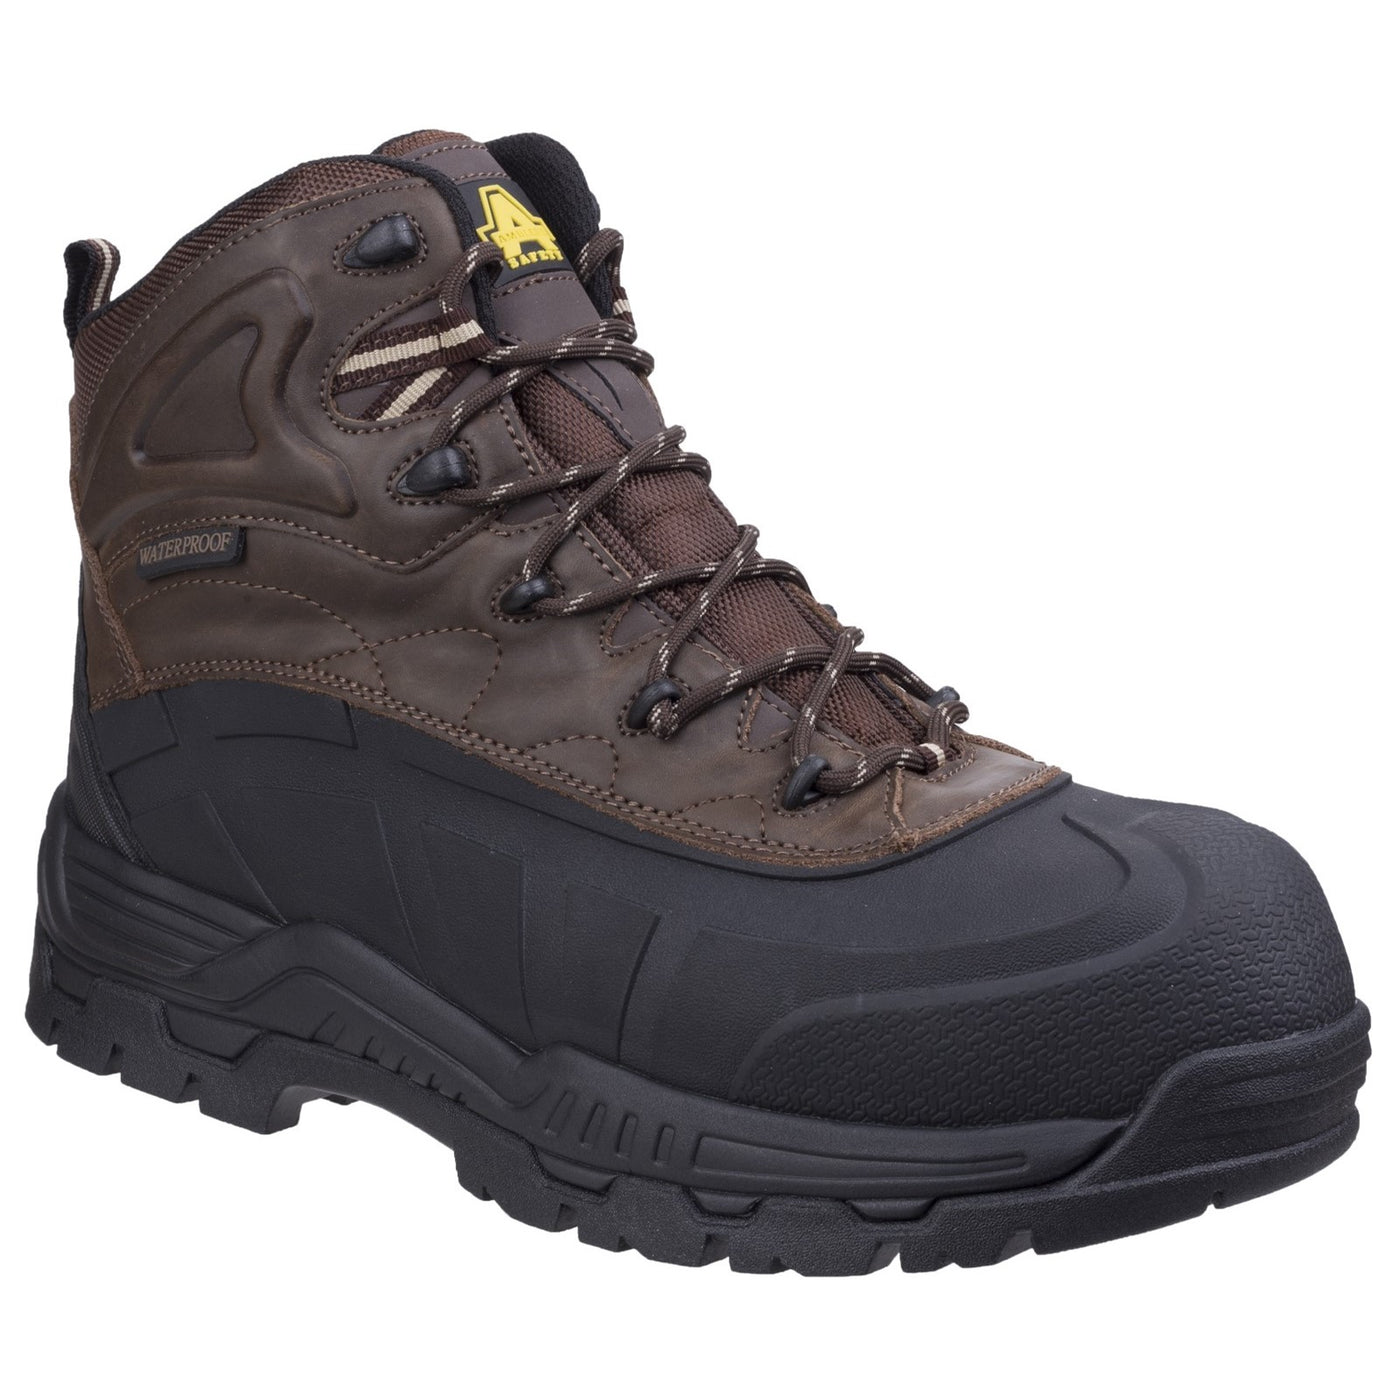 Amblers Safety Orca Brown Hybrid Wp Non-metal Safety Boot